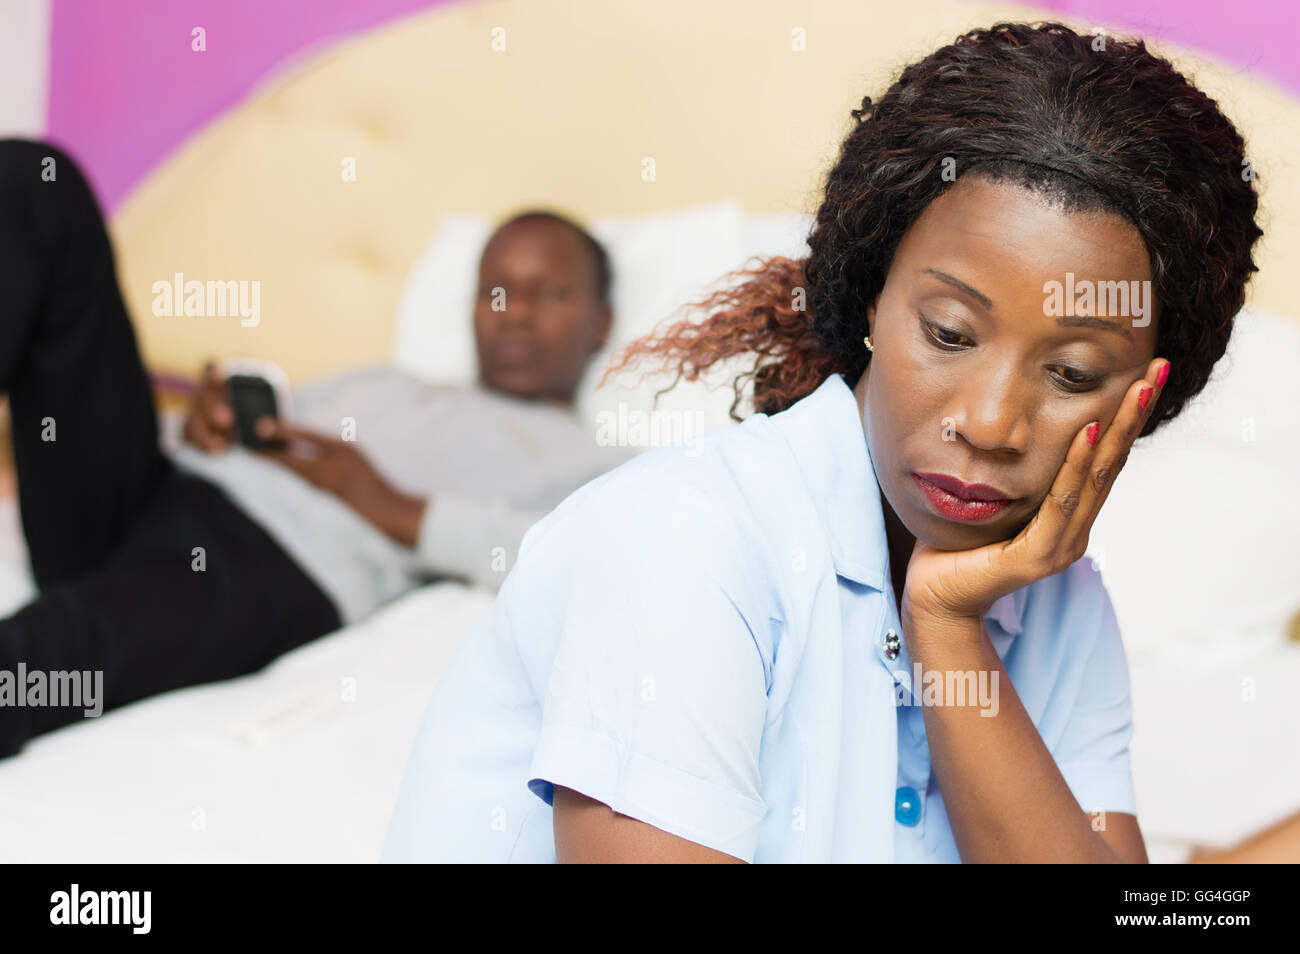 this young woman is angry against her husband because they disputed. Stock Photo